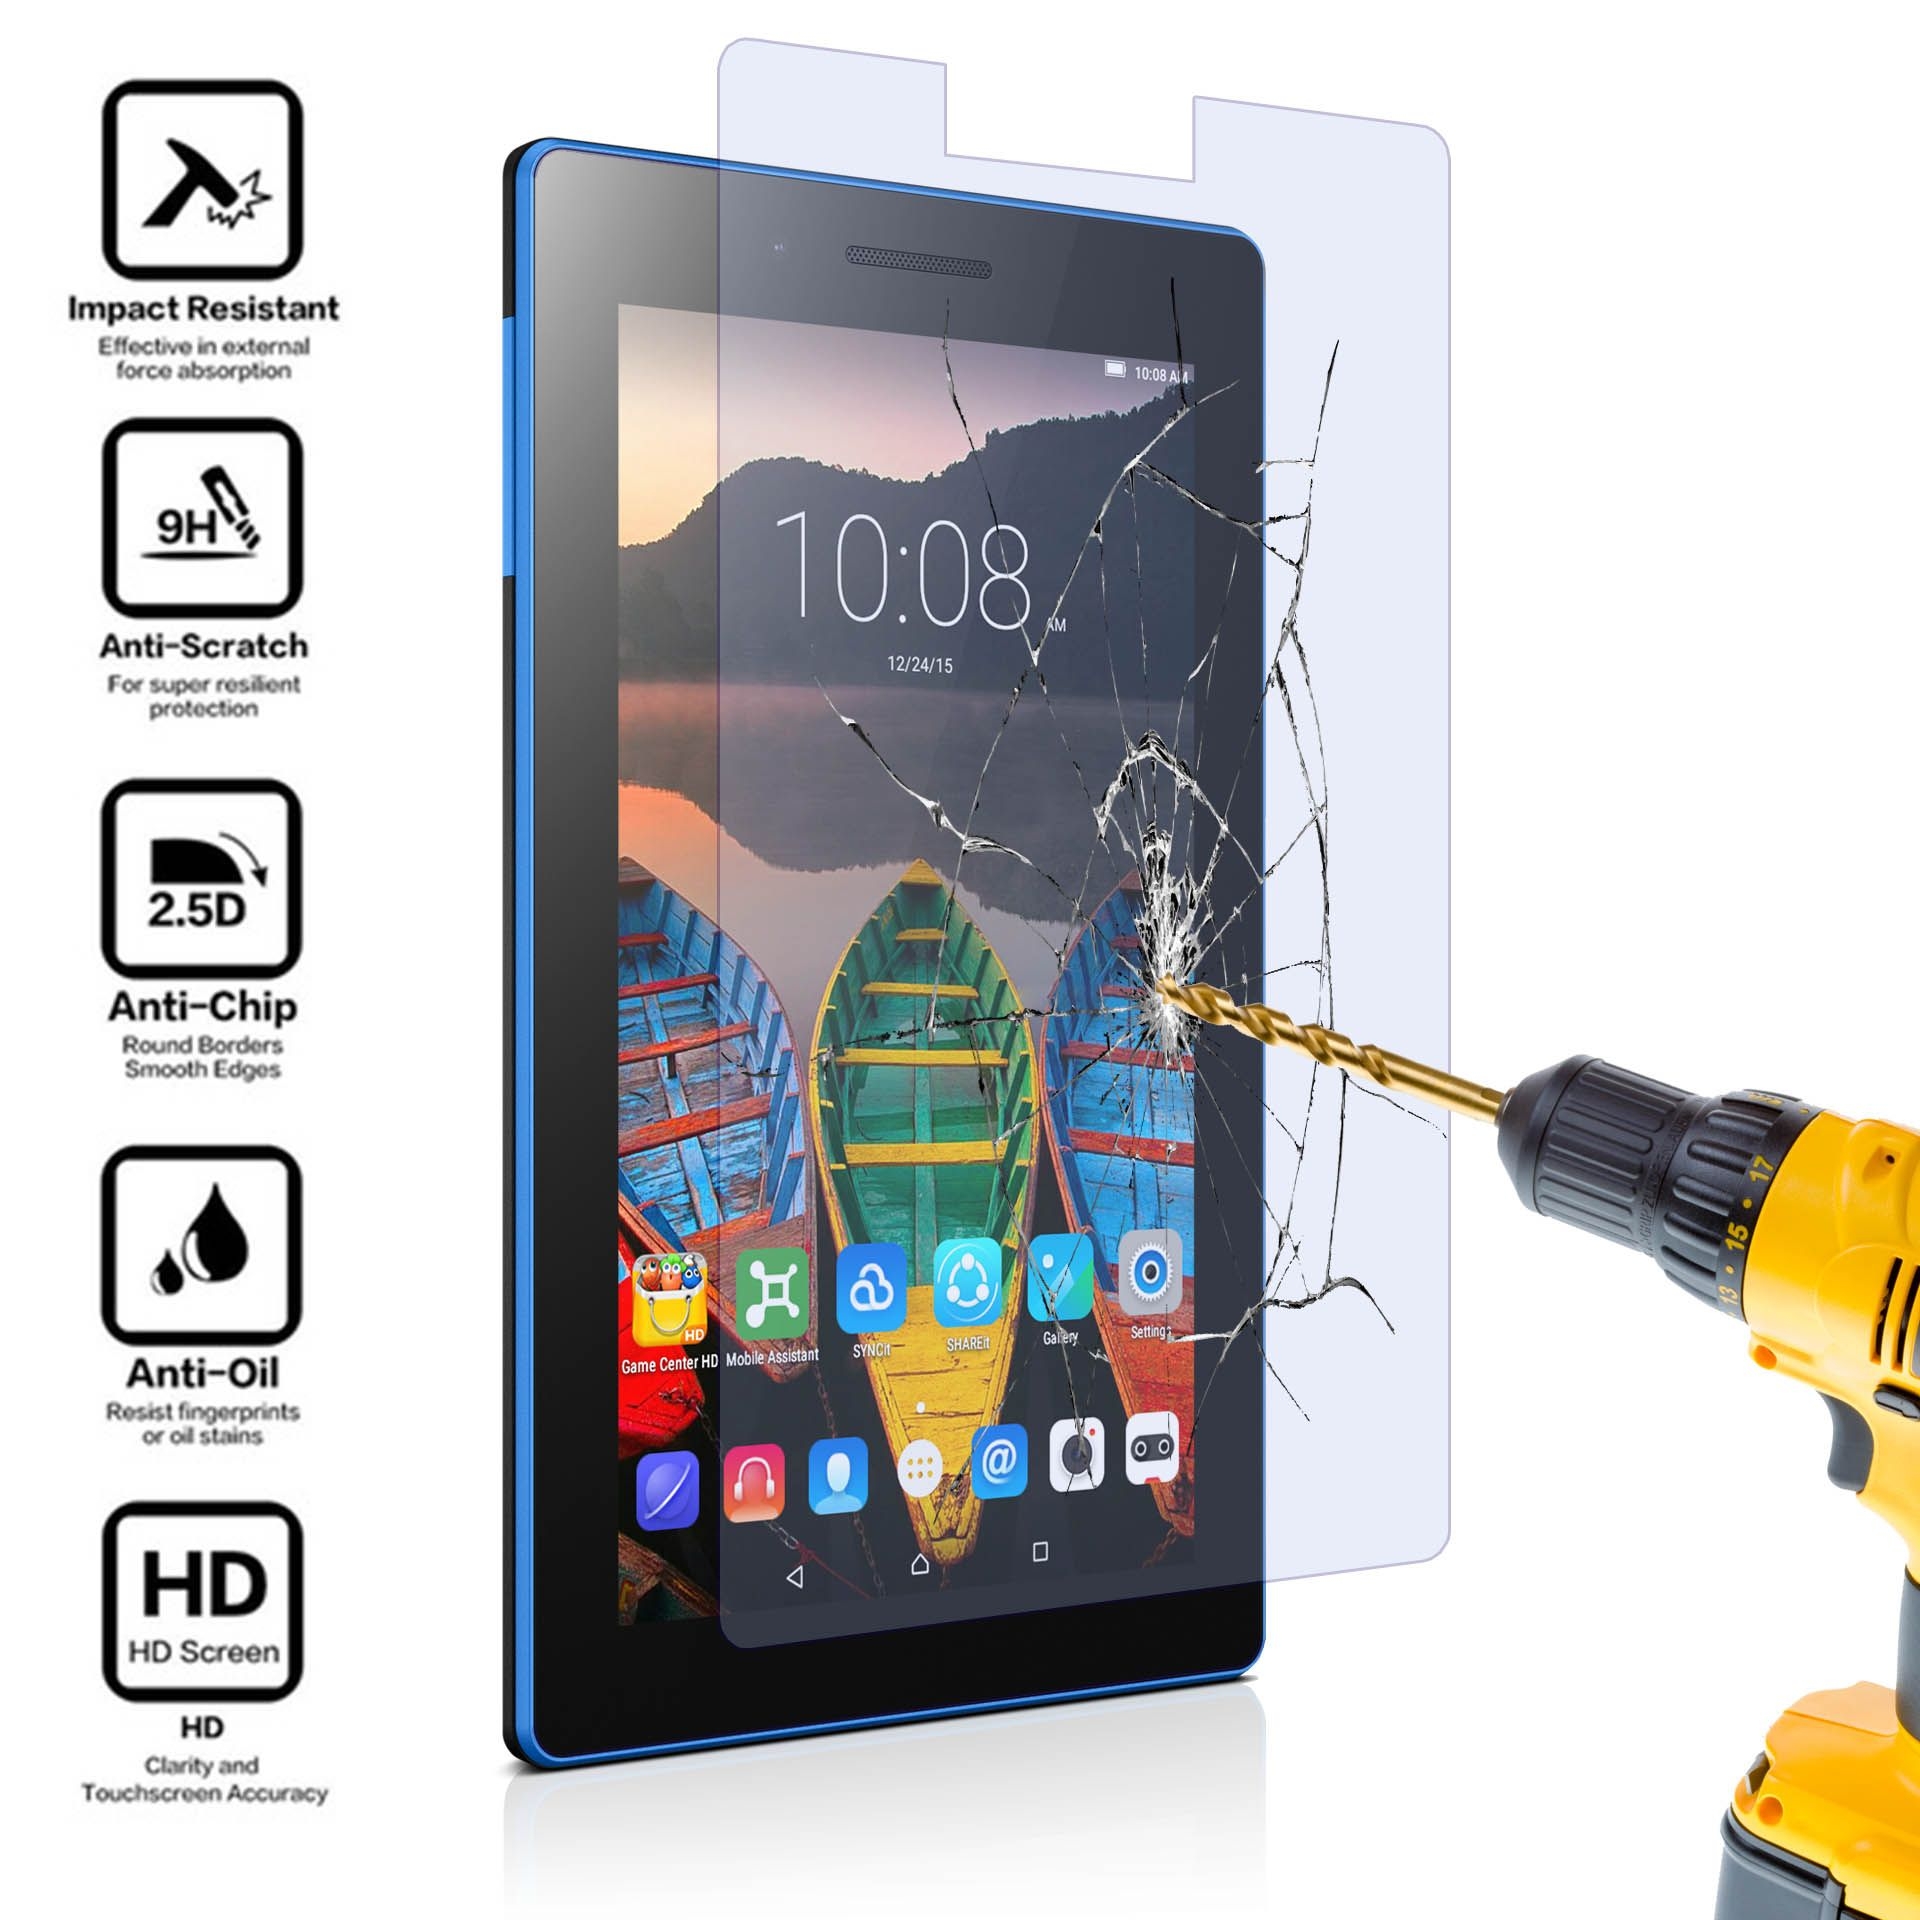 Tempered glass screen protector for tablets – Samsung Tab S2 9.7 T810/815